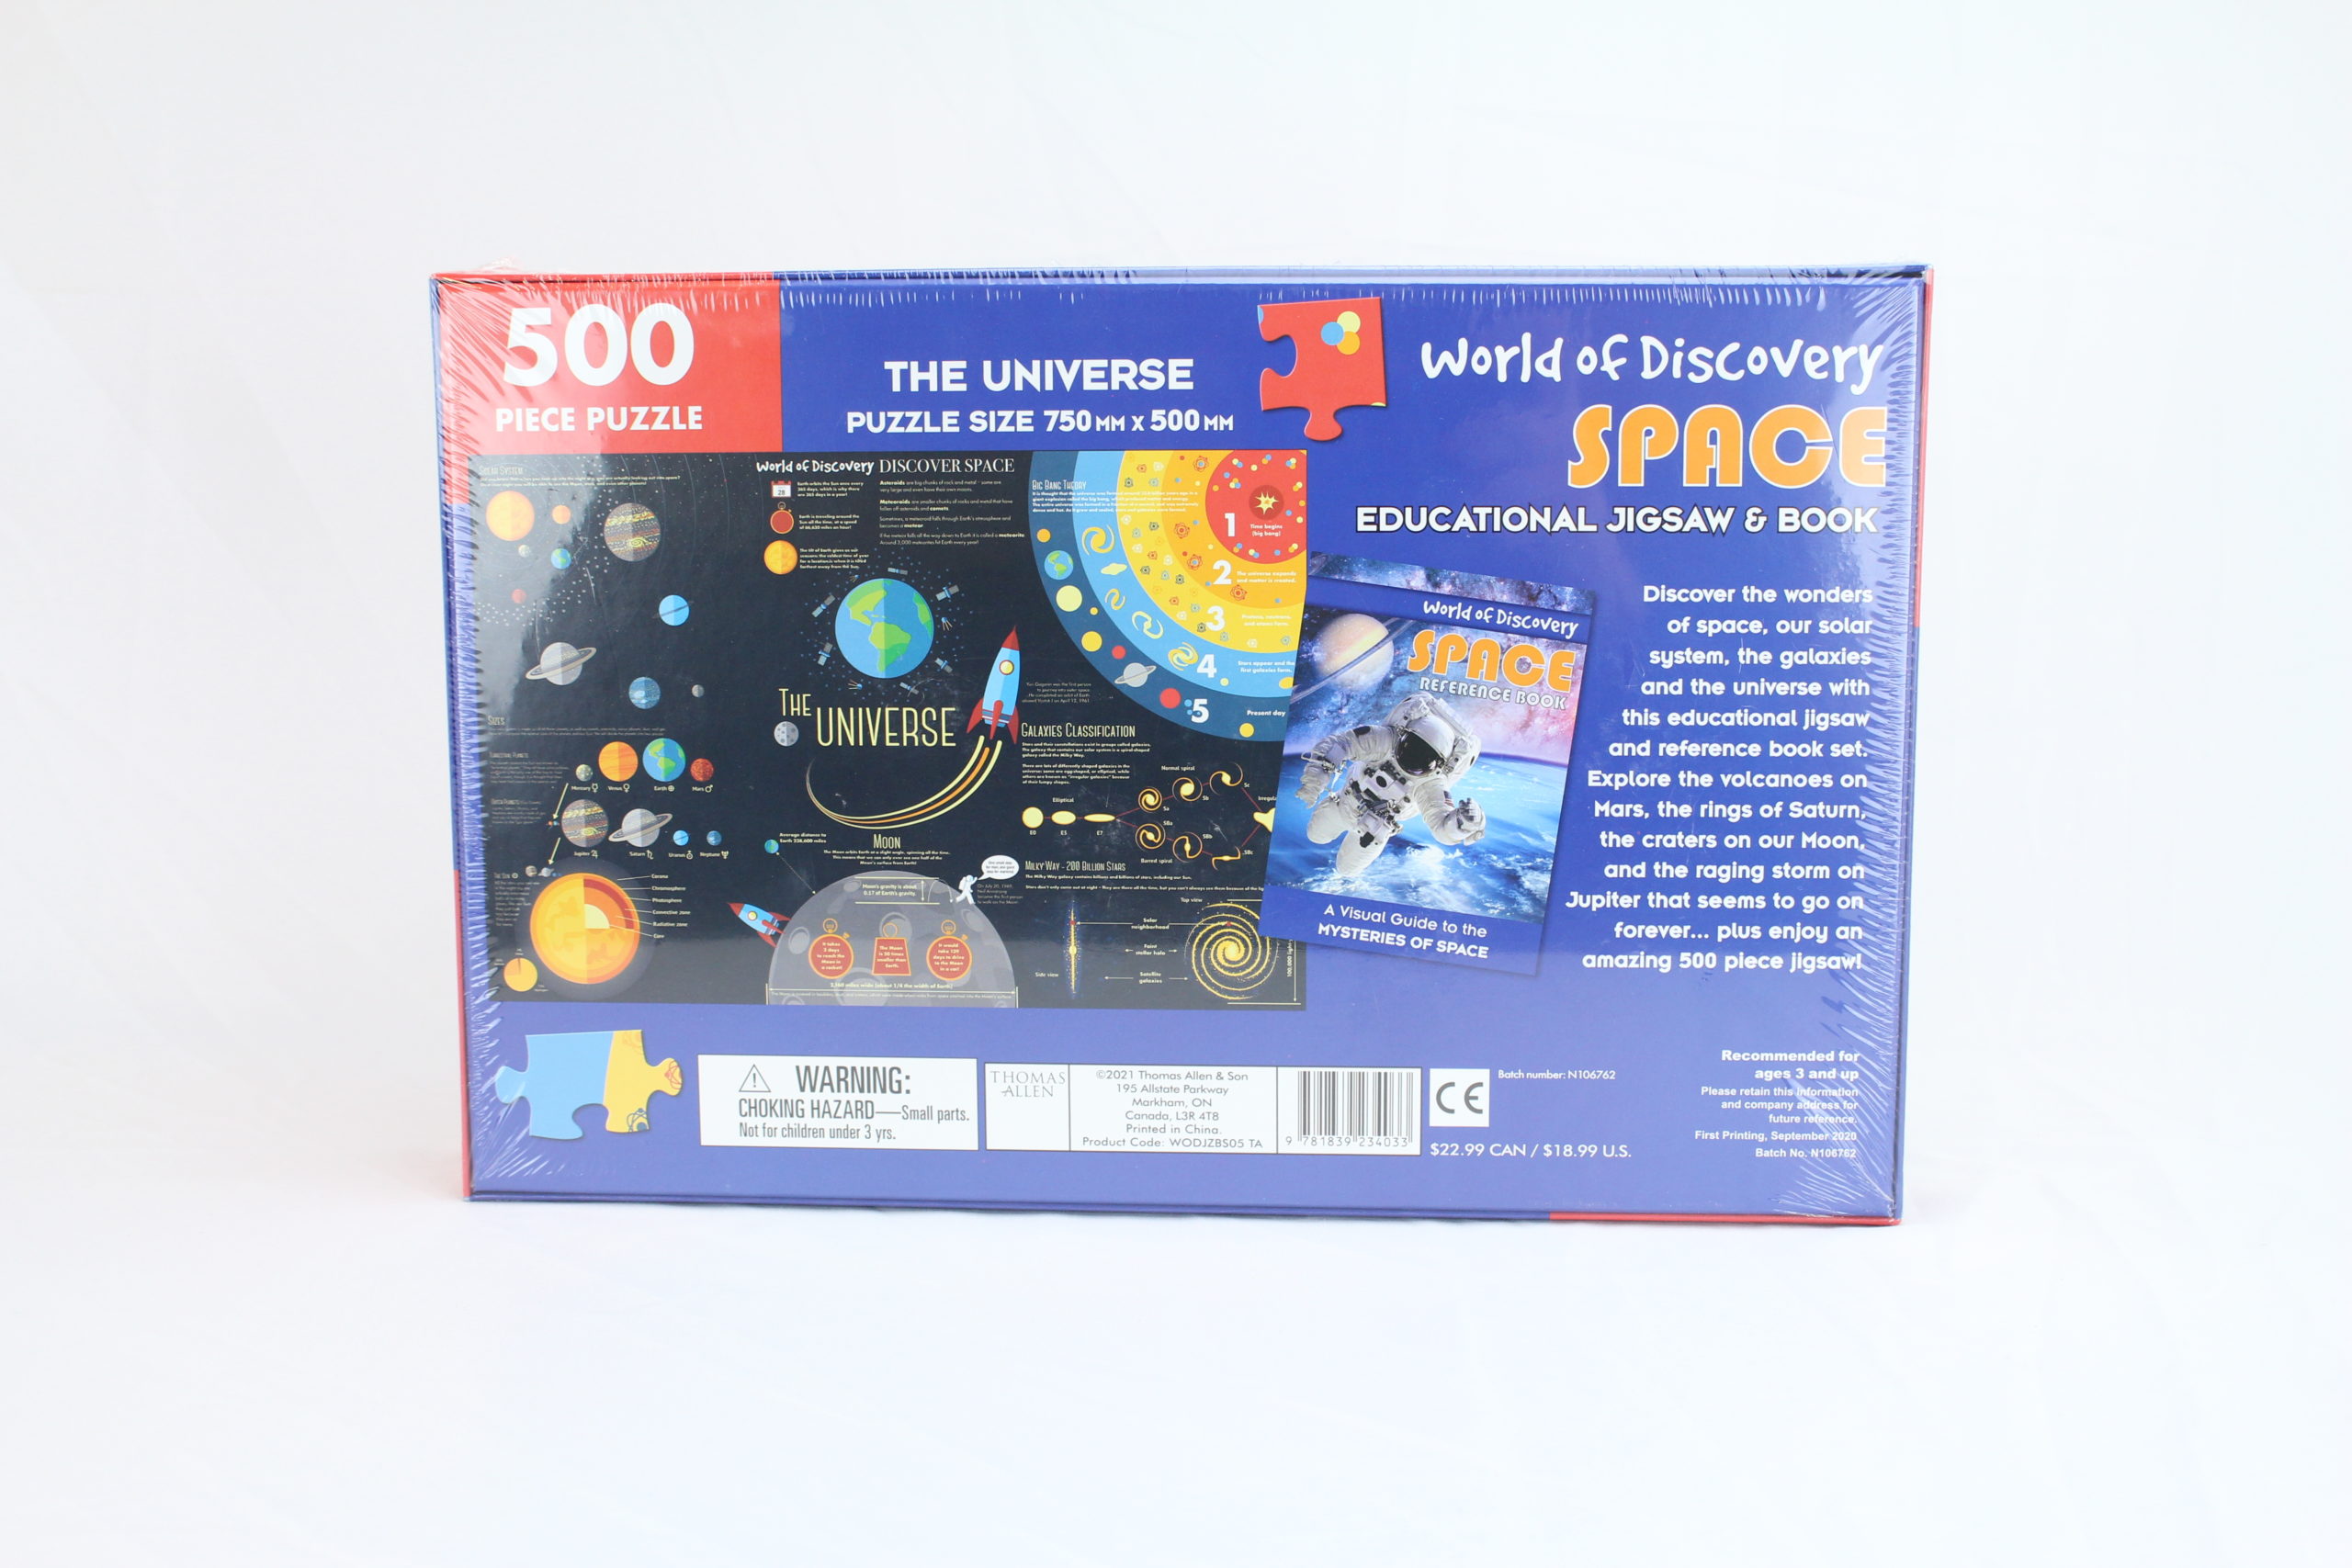 Details about   2020 Desert Planet Educational 500 Piece Jigsaw Puzzle Adults Kid Puzzle Toy 